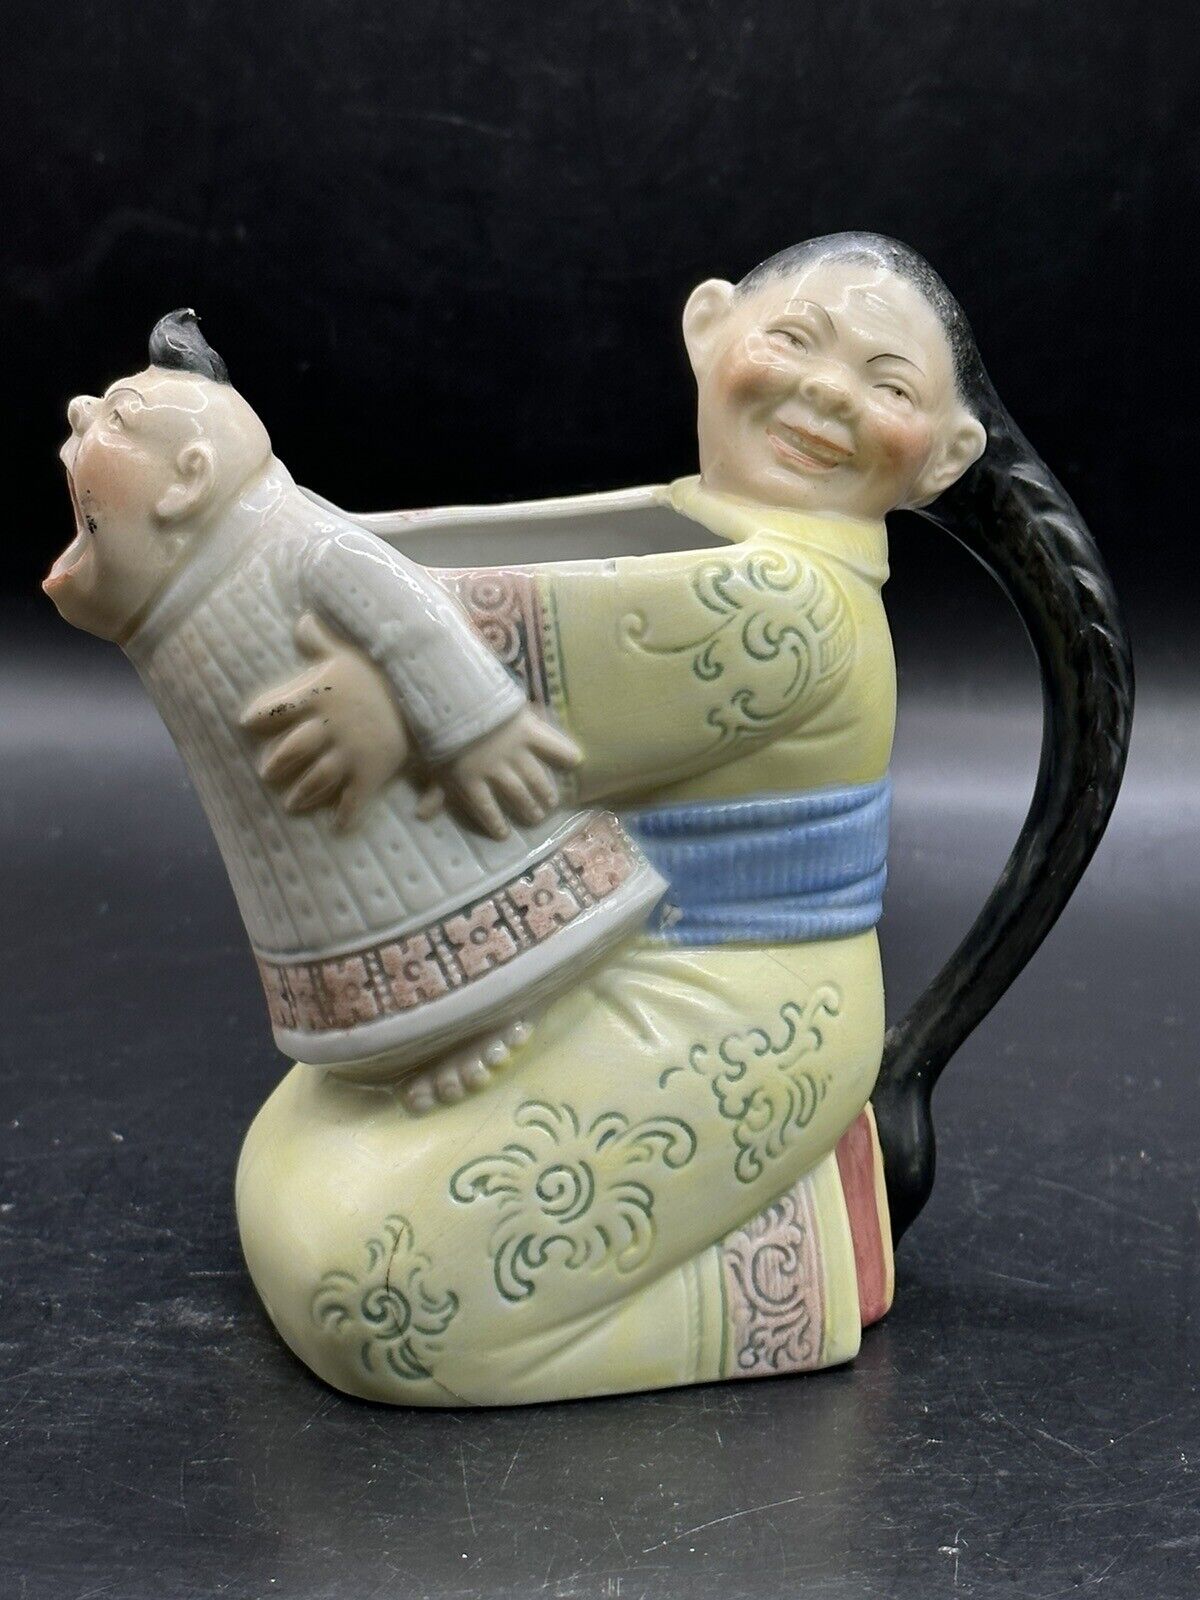 Schafer & Vater Whimsical Pitcher Chinese Man Holding a Crying Baby RARE